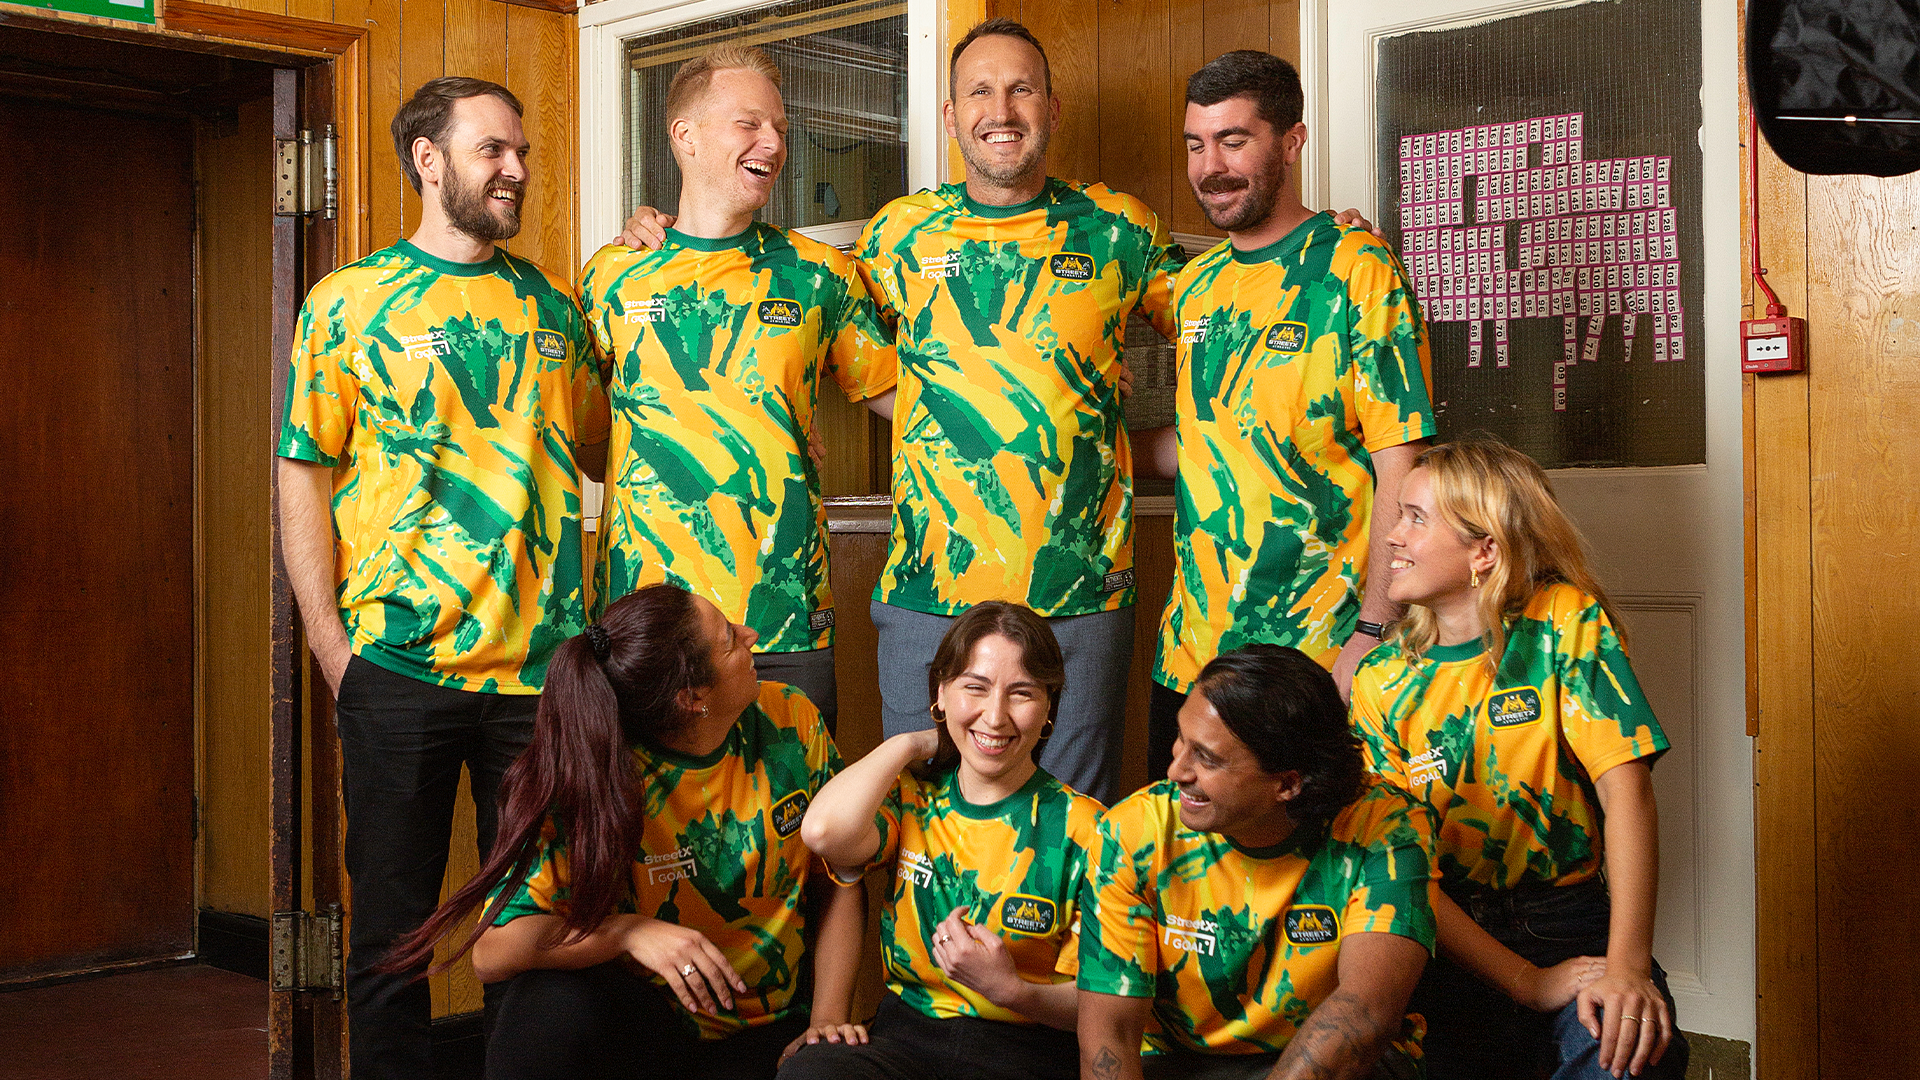 GOAL and StreetX team up to celebrate iconic '90s Socceroos shirt